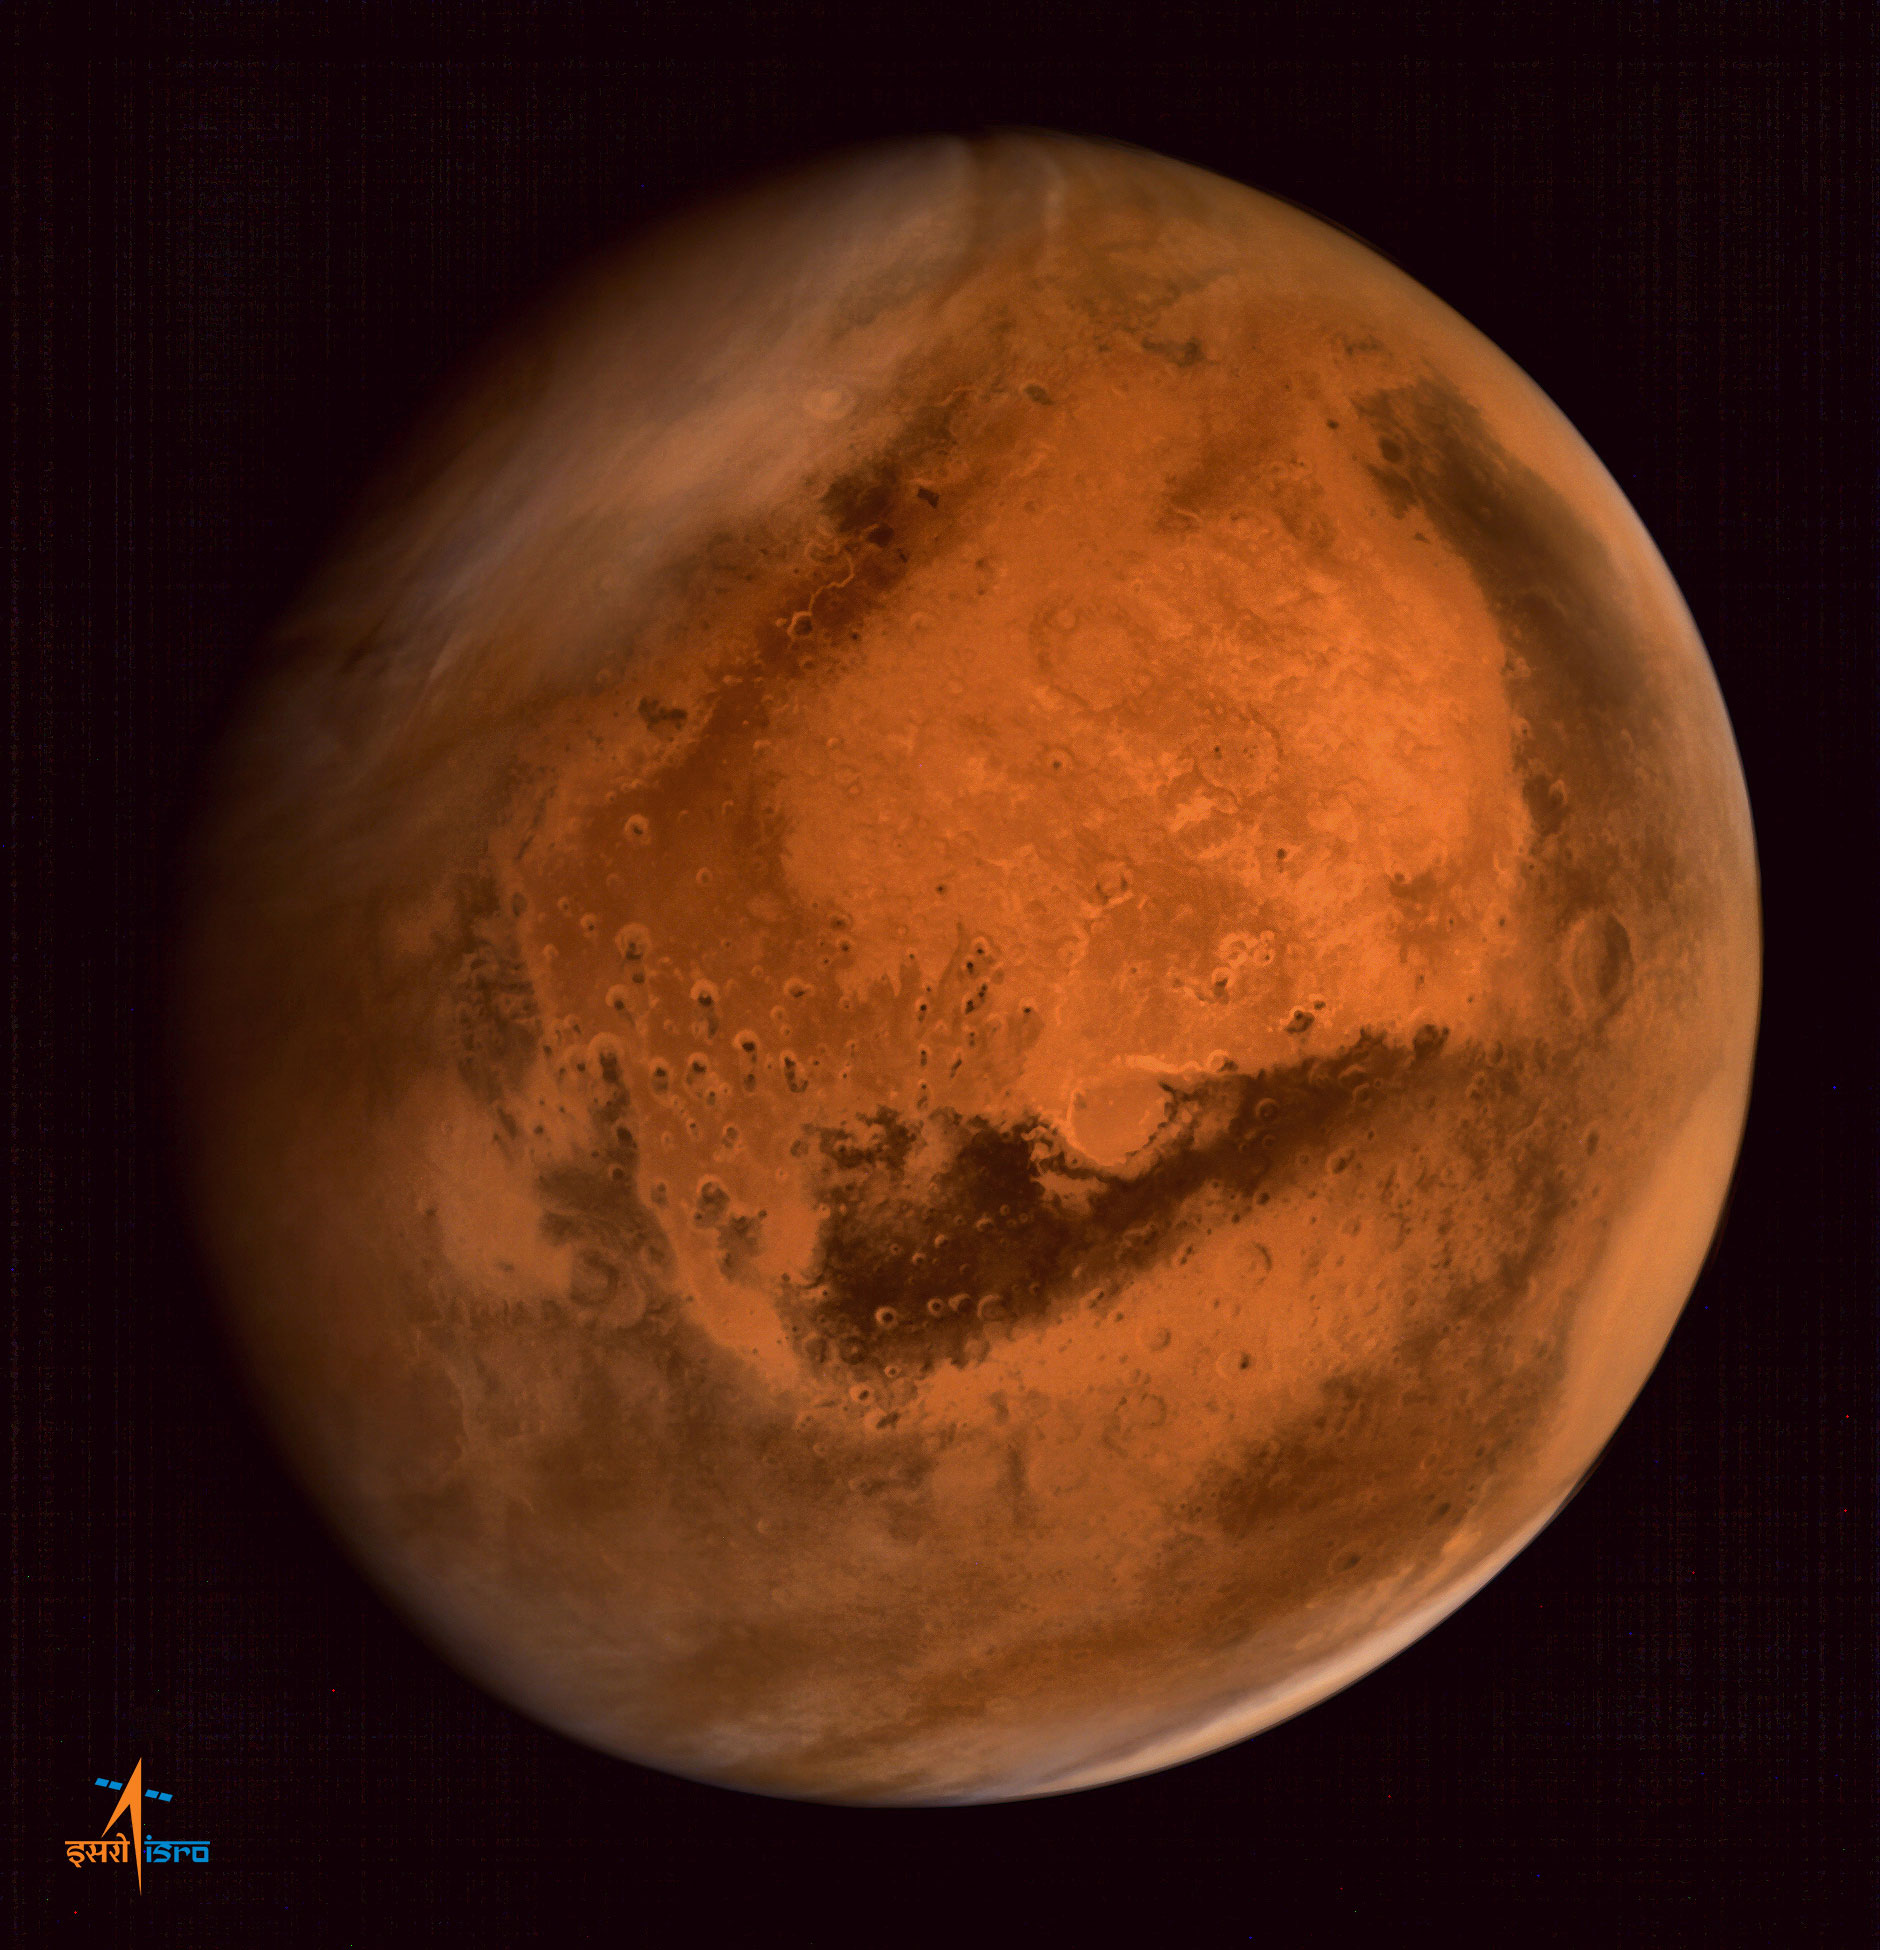 Regional dust storm activities over northern hemisphere of Mars - captured by the ISRO’s Mars Orbiter Mission. The image was taken from an altitude of 74500 km from the surface of Mars. Credit: ISRO